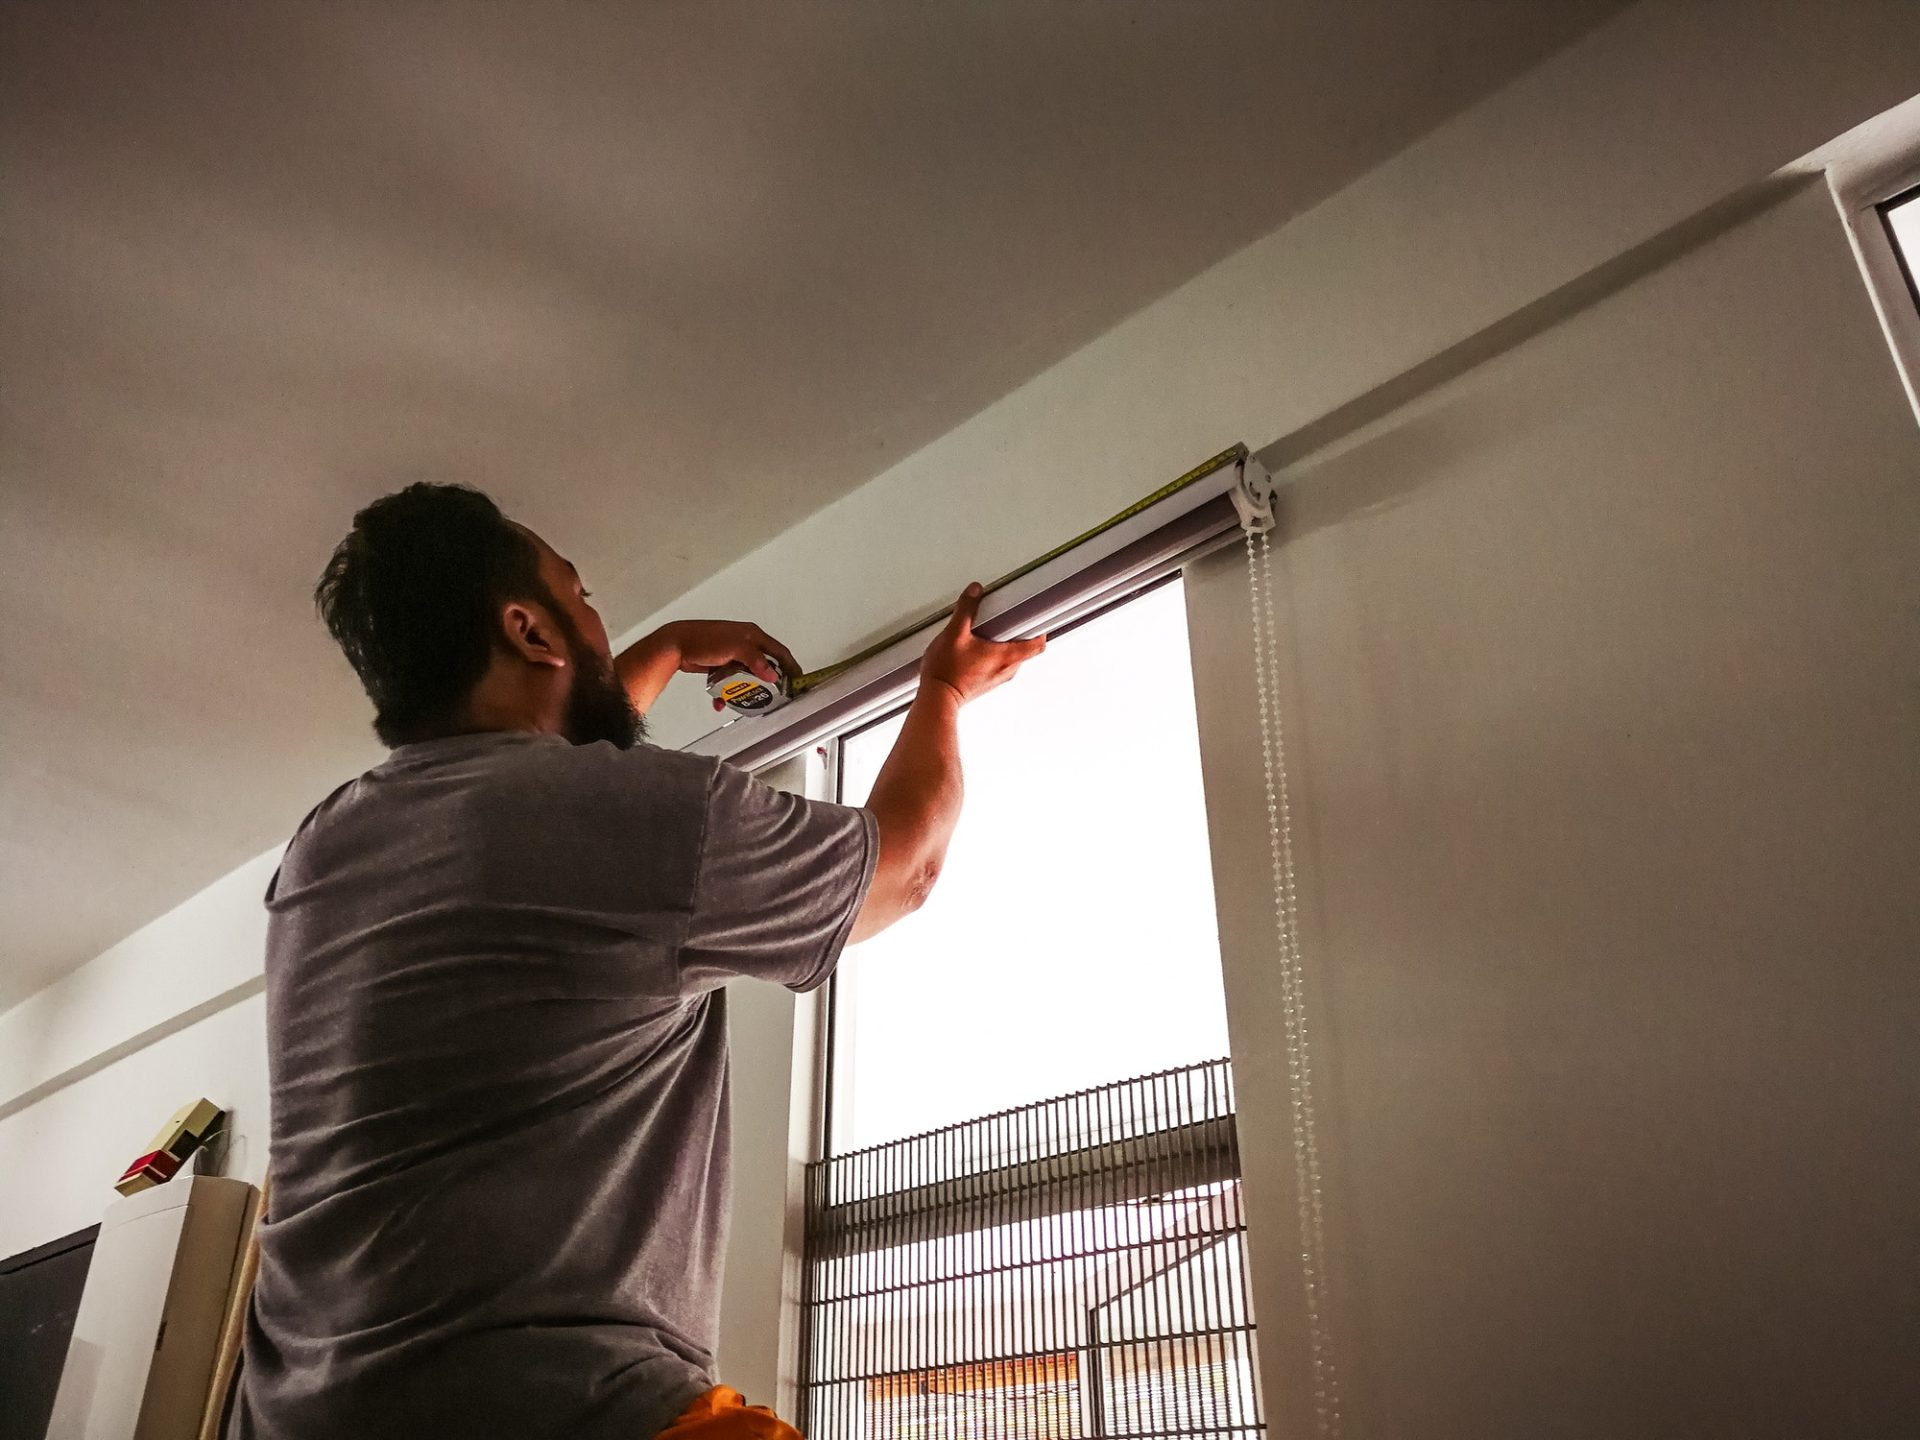 Man measure and install curtain panel at the window. do it yourself, diy, man at work.